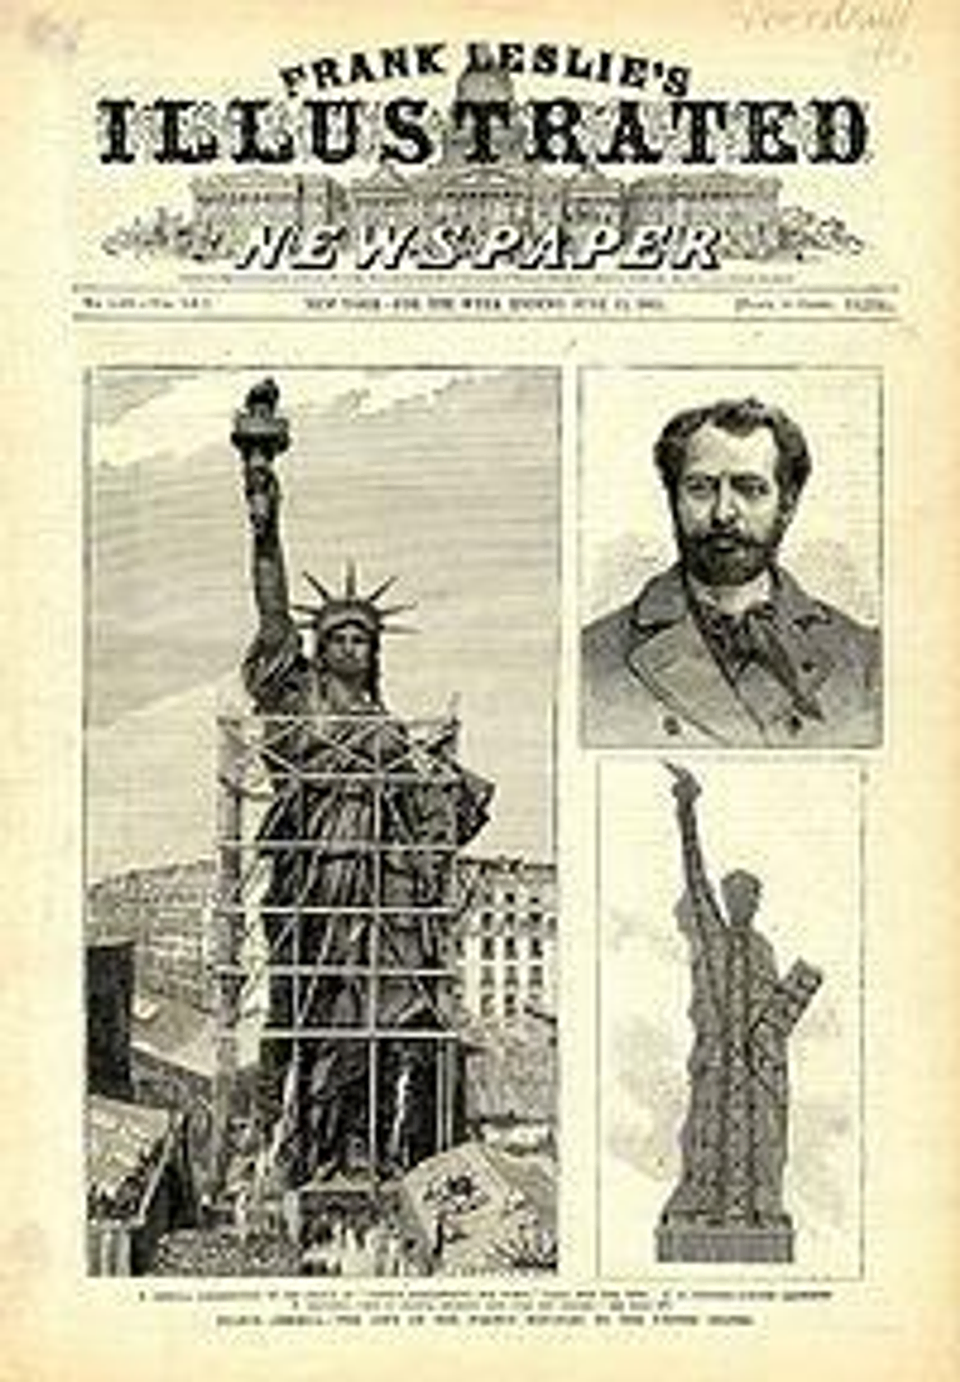 A newspaper clipping of the Statue of Liberty Project, featuring Brother Bartholdi